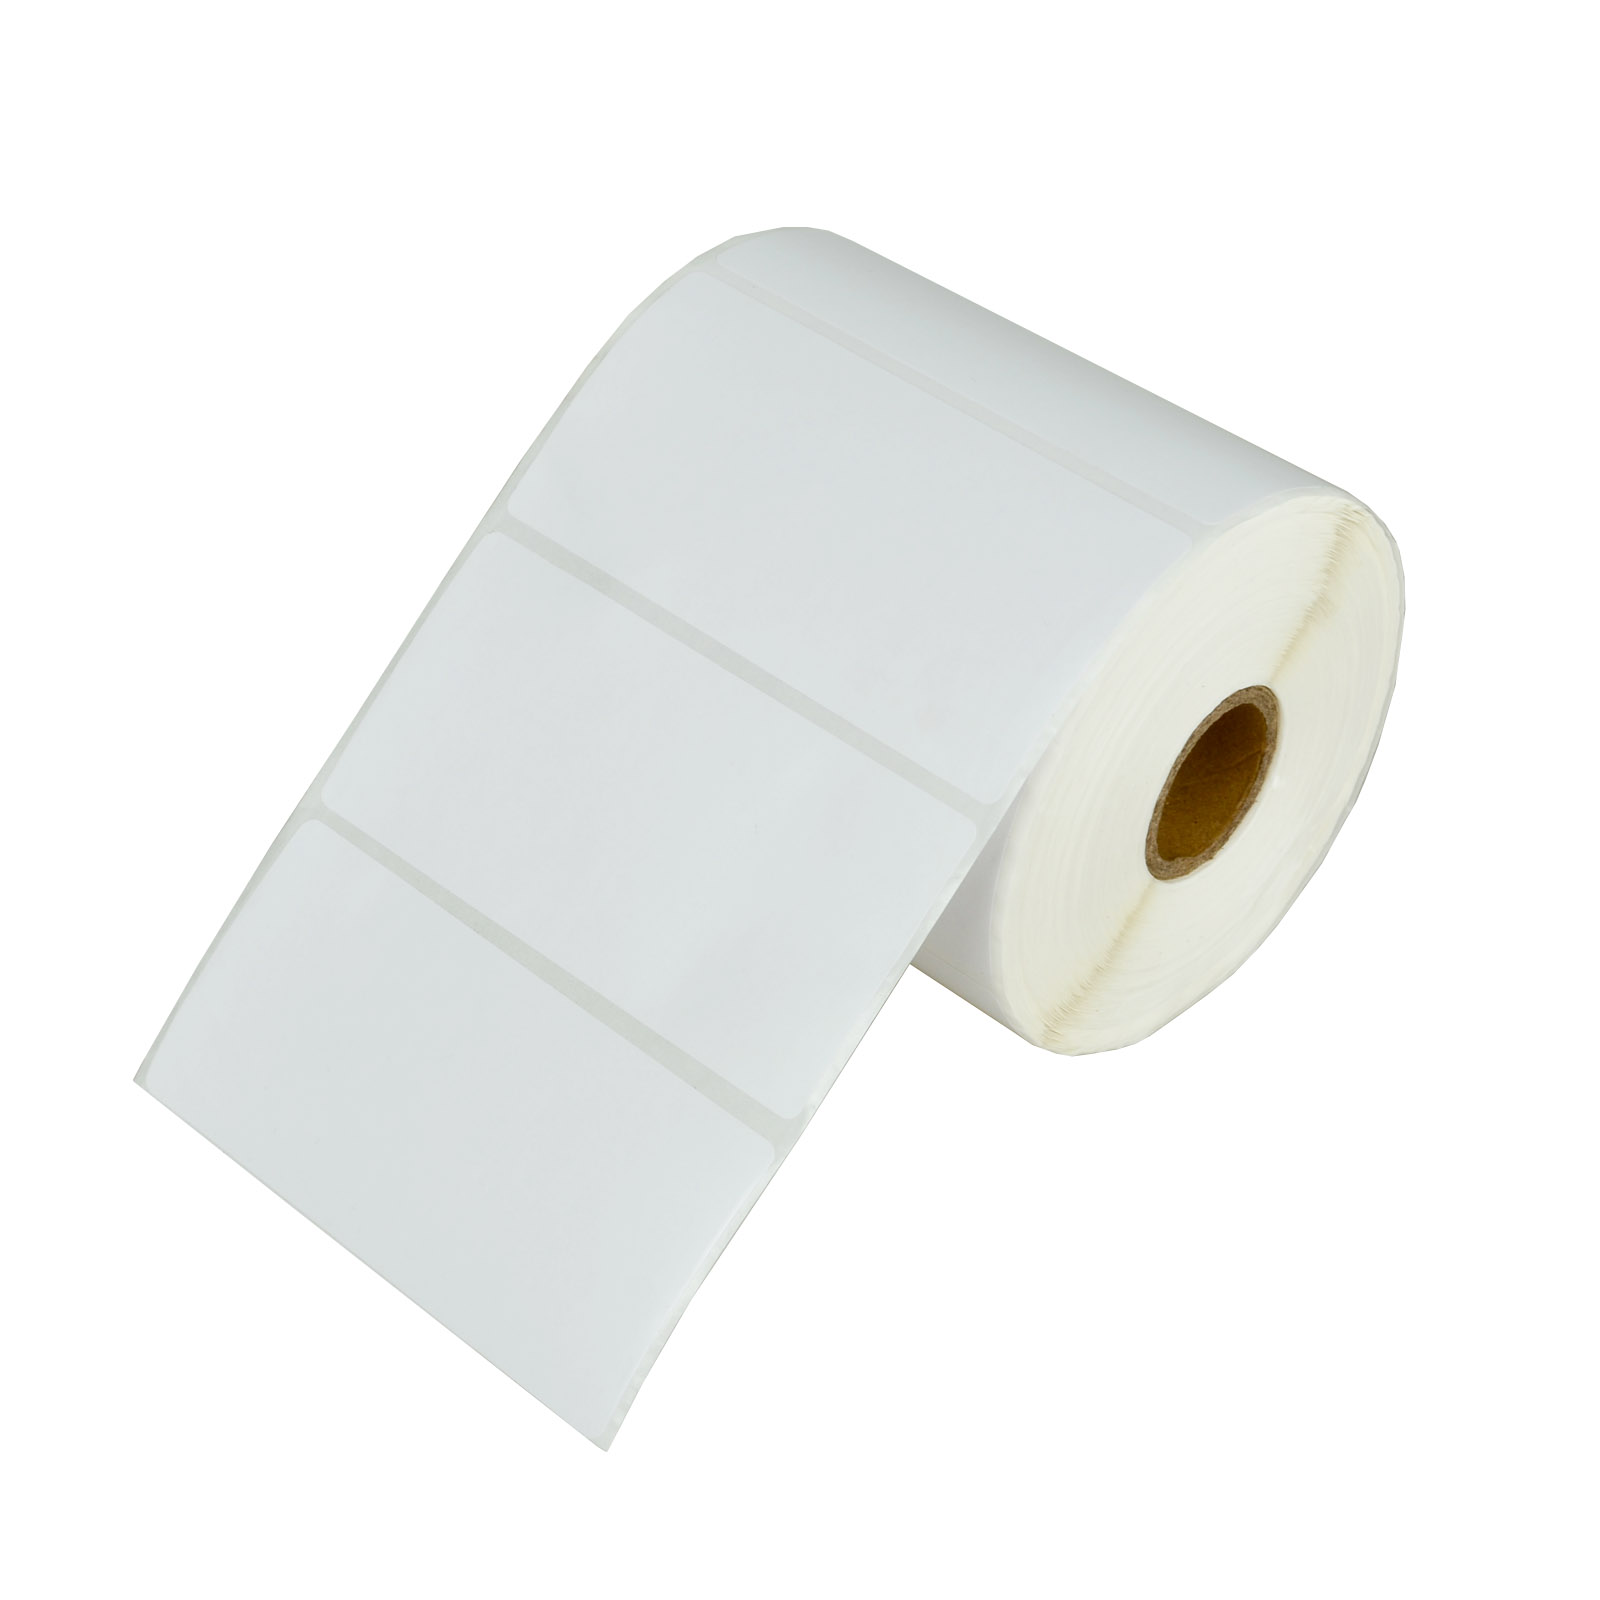 GREENCYCLE 5 Roll (810 labels per roll) White Die Cut Paper Label Compatible for Brother RDS03U1 4"x2" TD-4000 TD-4100N Printer